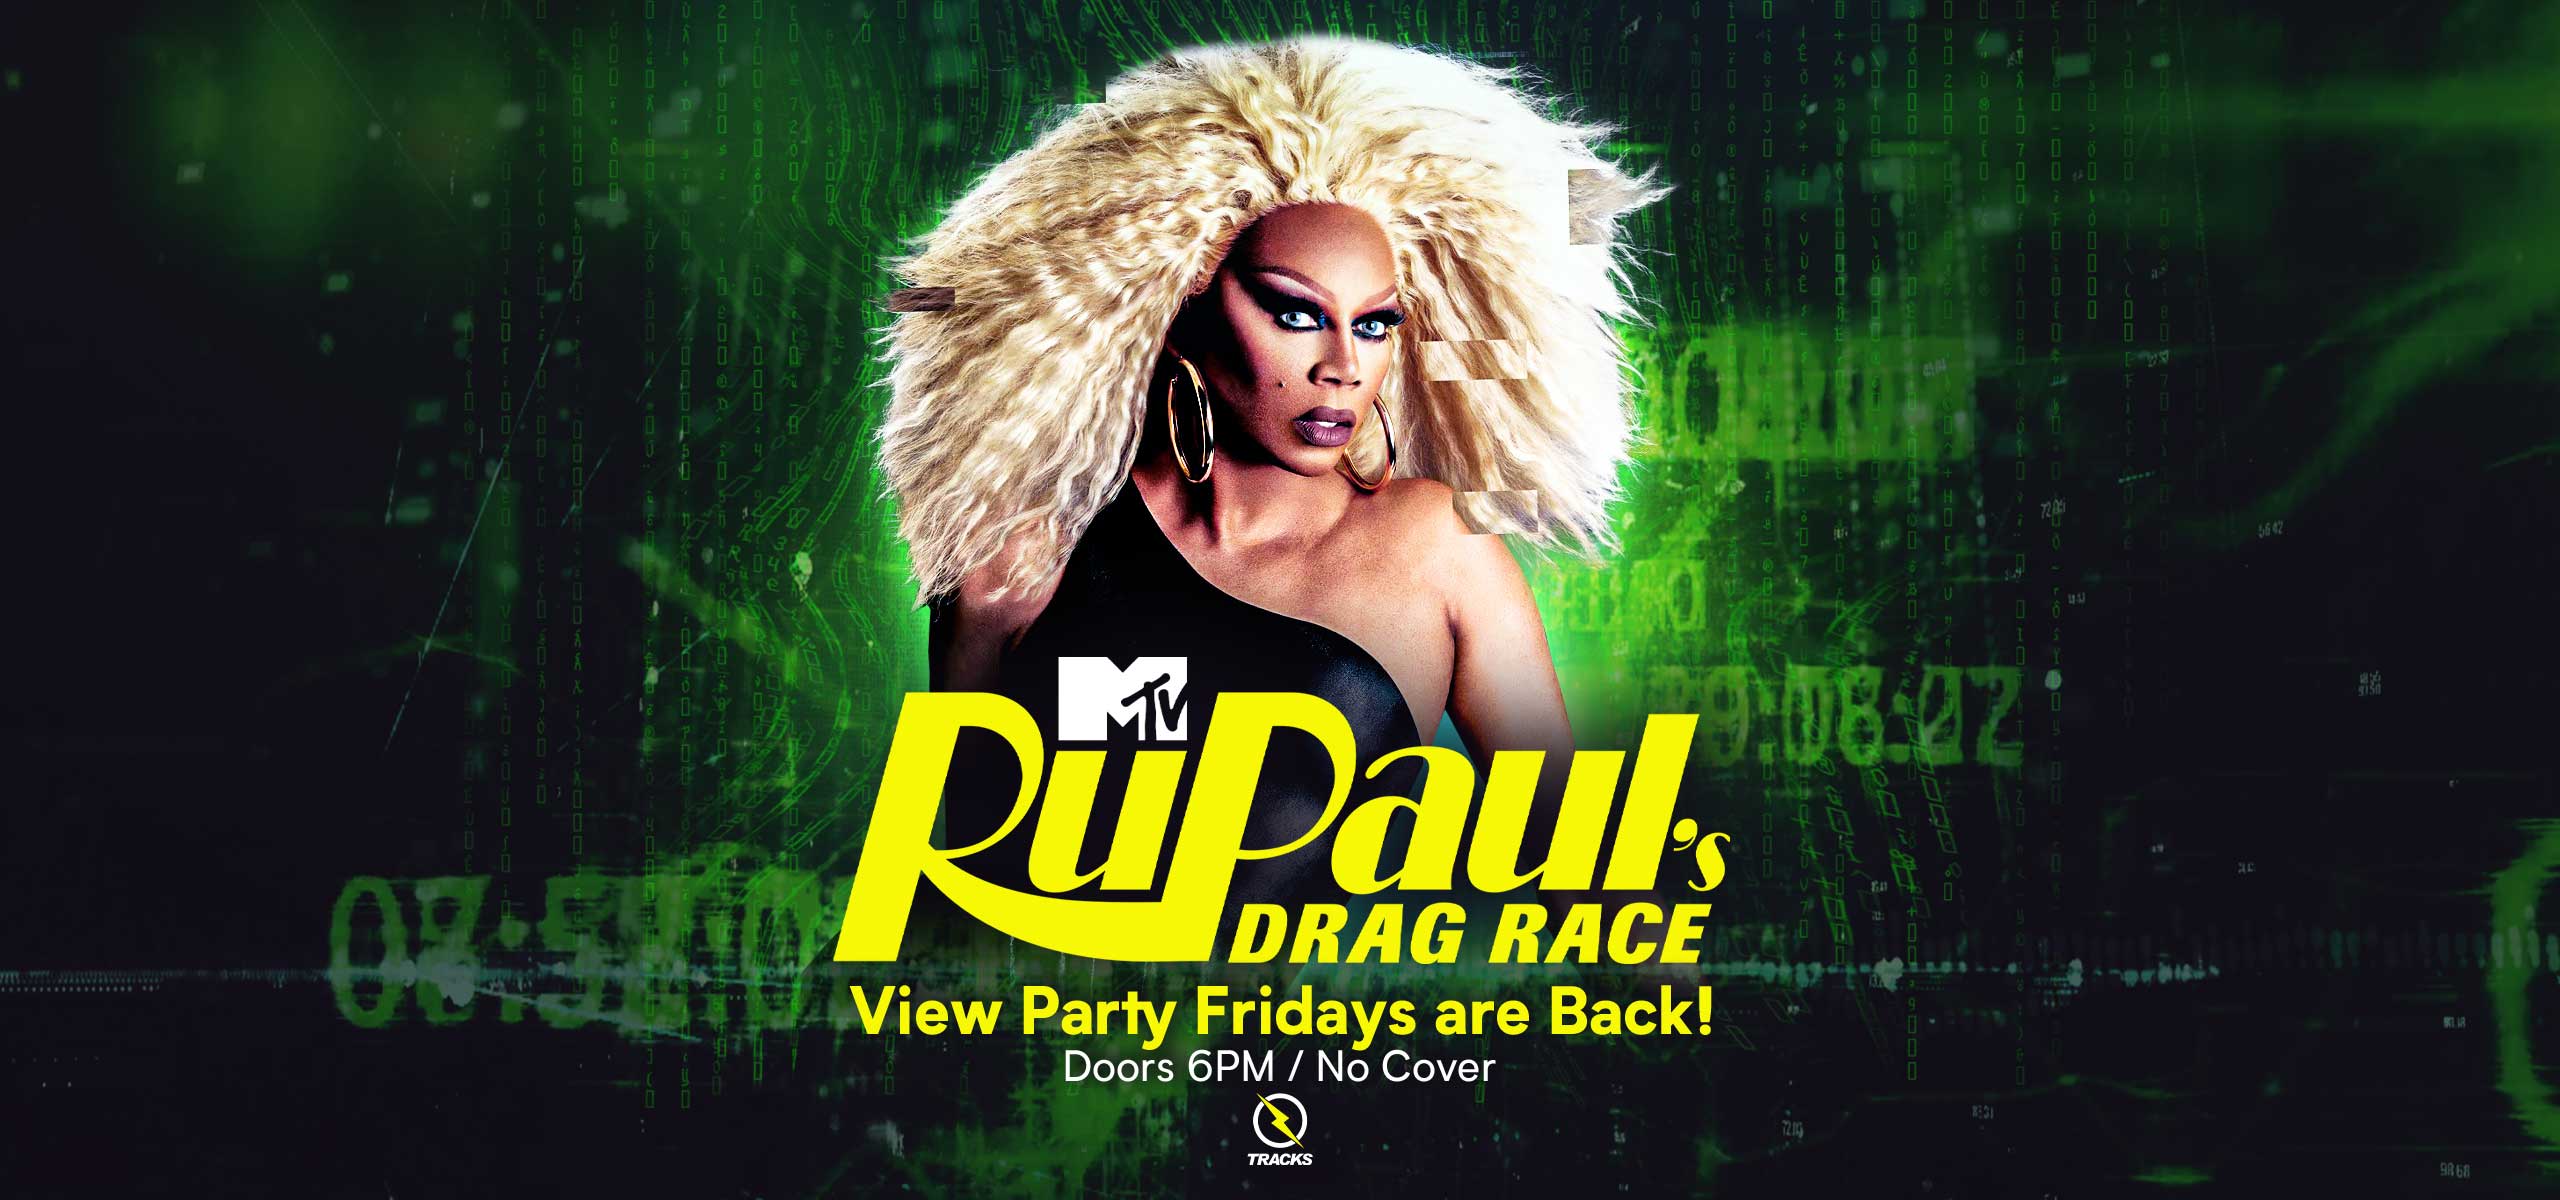 21+ RuPaul’s Drag Race FINALE – View Party Fridays